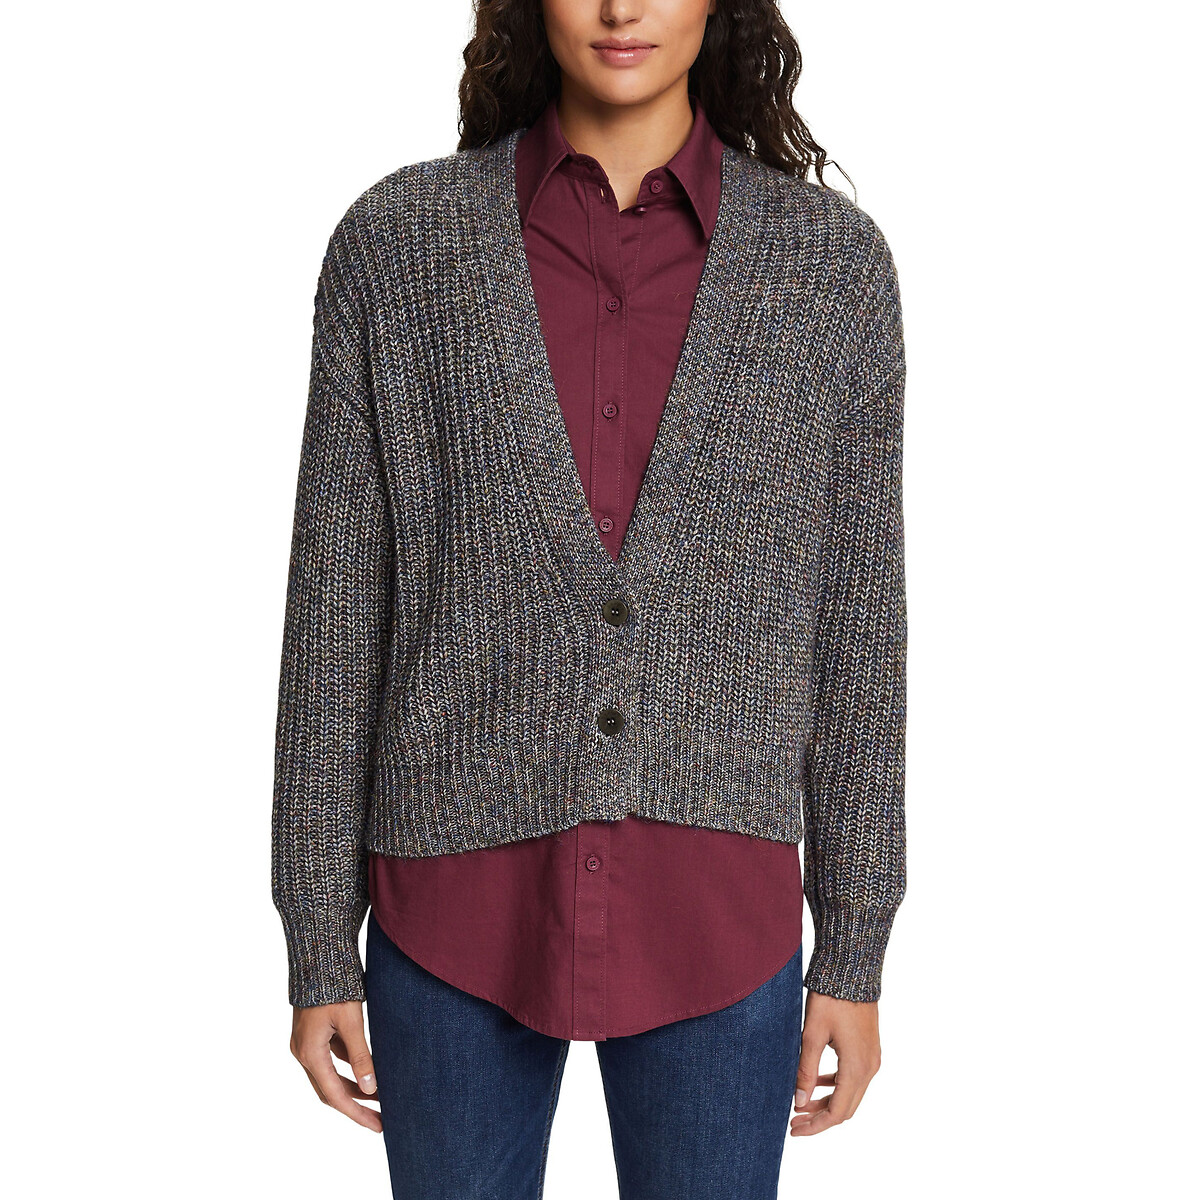 Marl Cotton Mix Cardigan with V-Neck